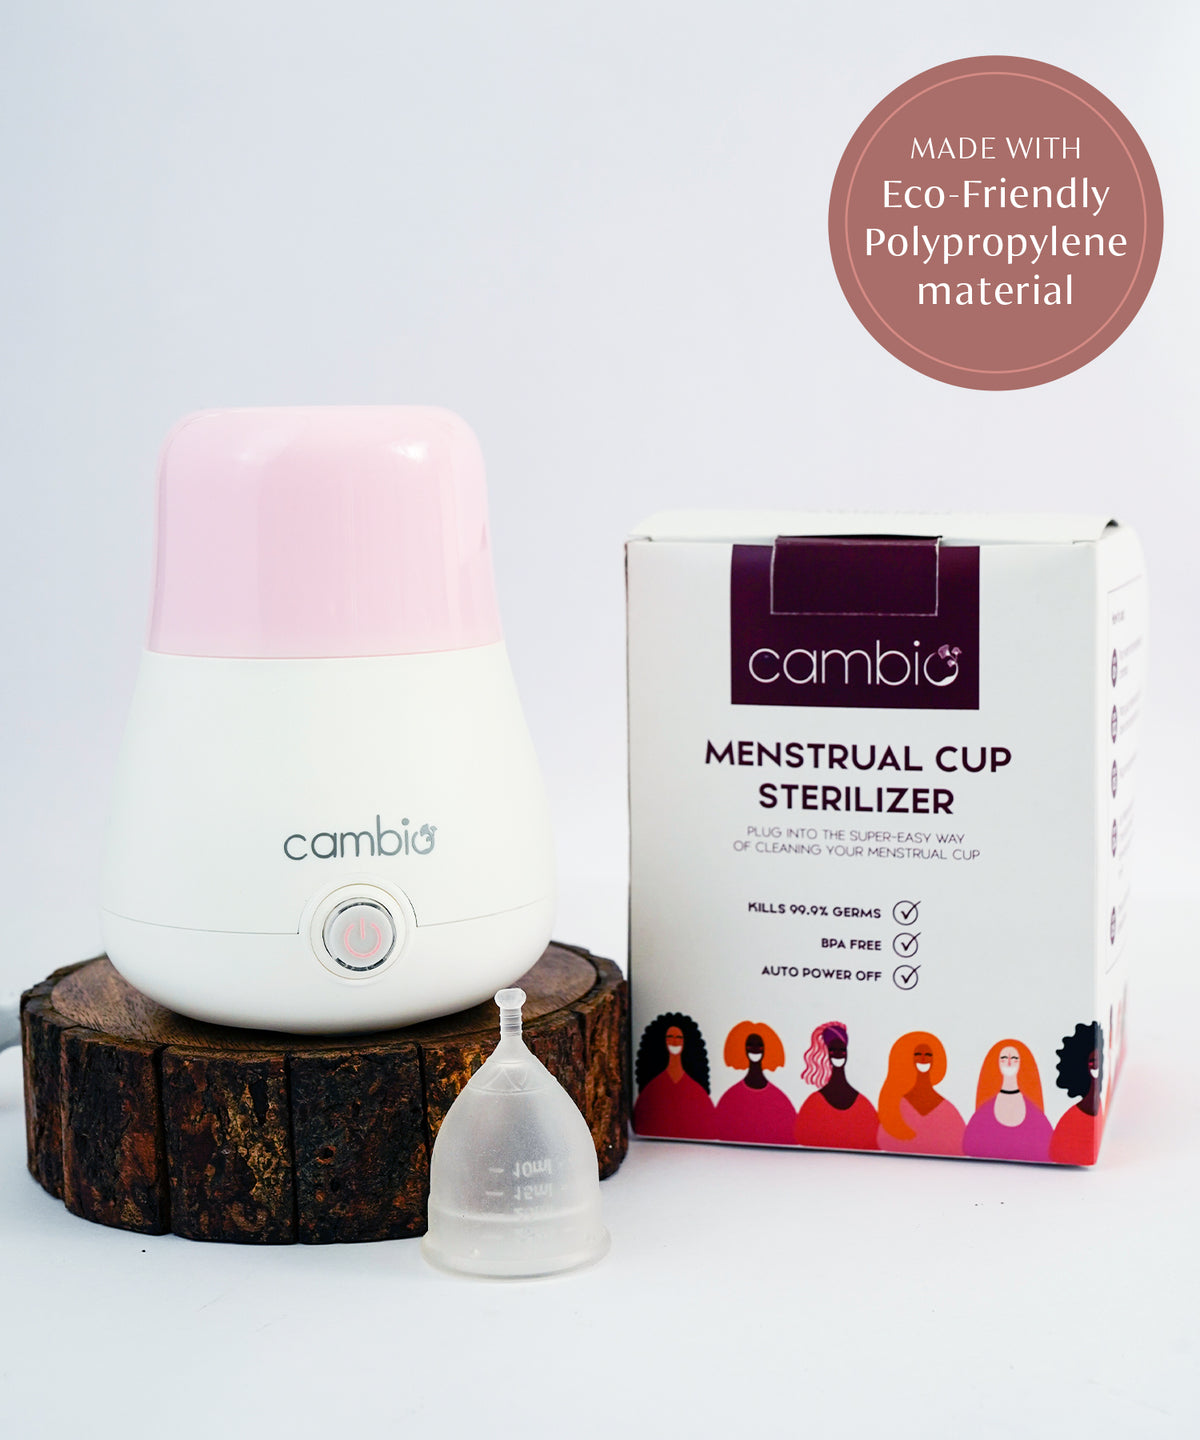 Menstrual Cup Sterilizer for Healthy and Convenient Period